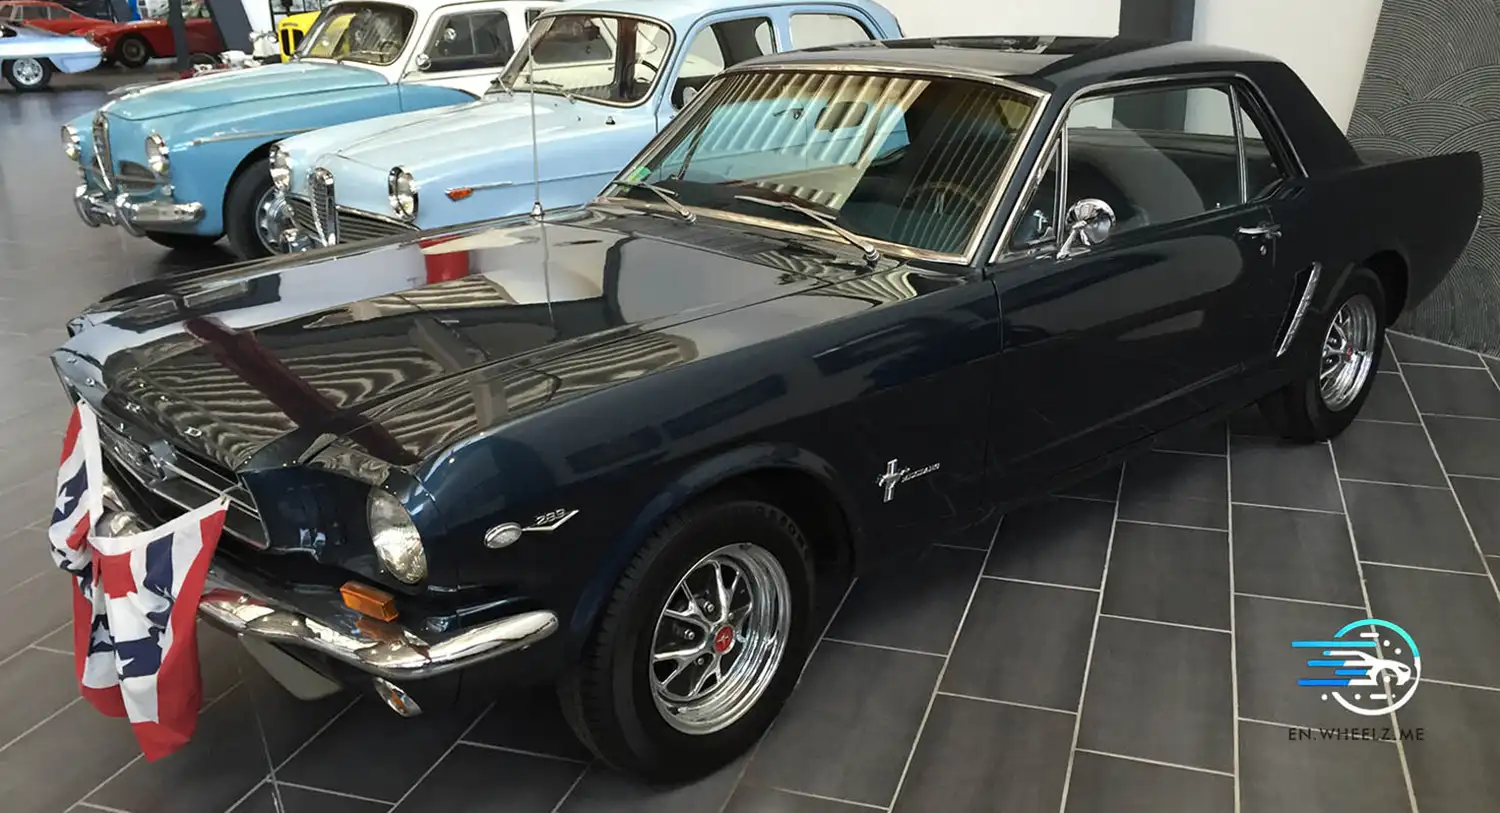 Ford Mustang – The Most Famous Muscle Car and A Smile-Maker In Any Language